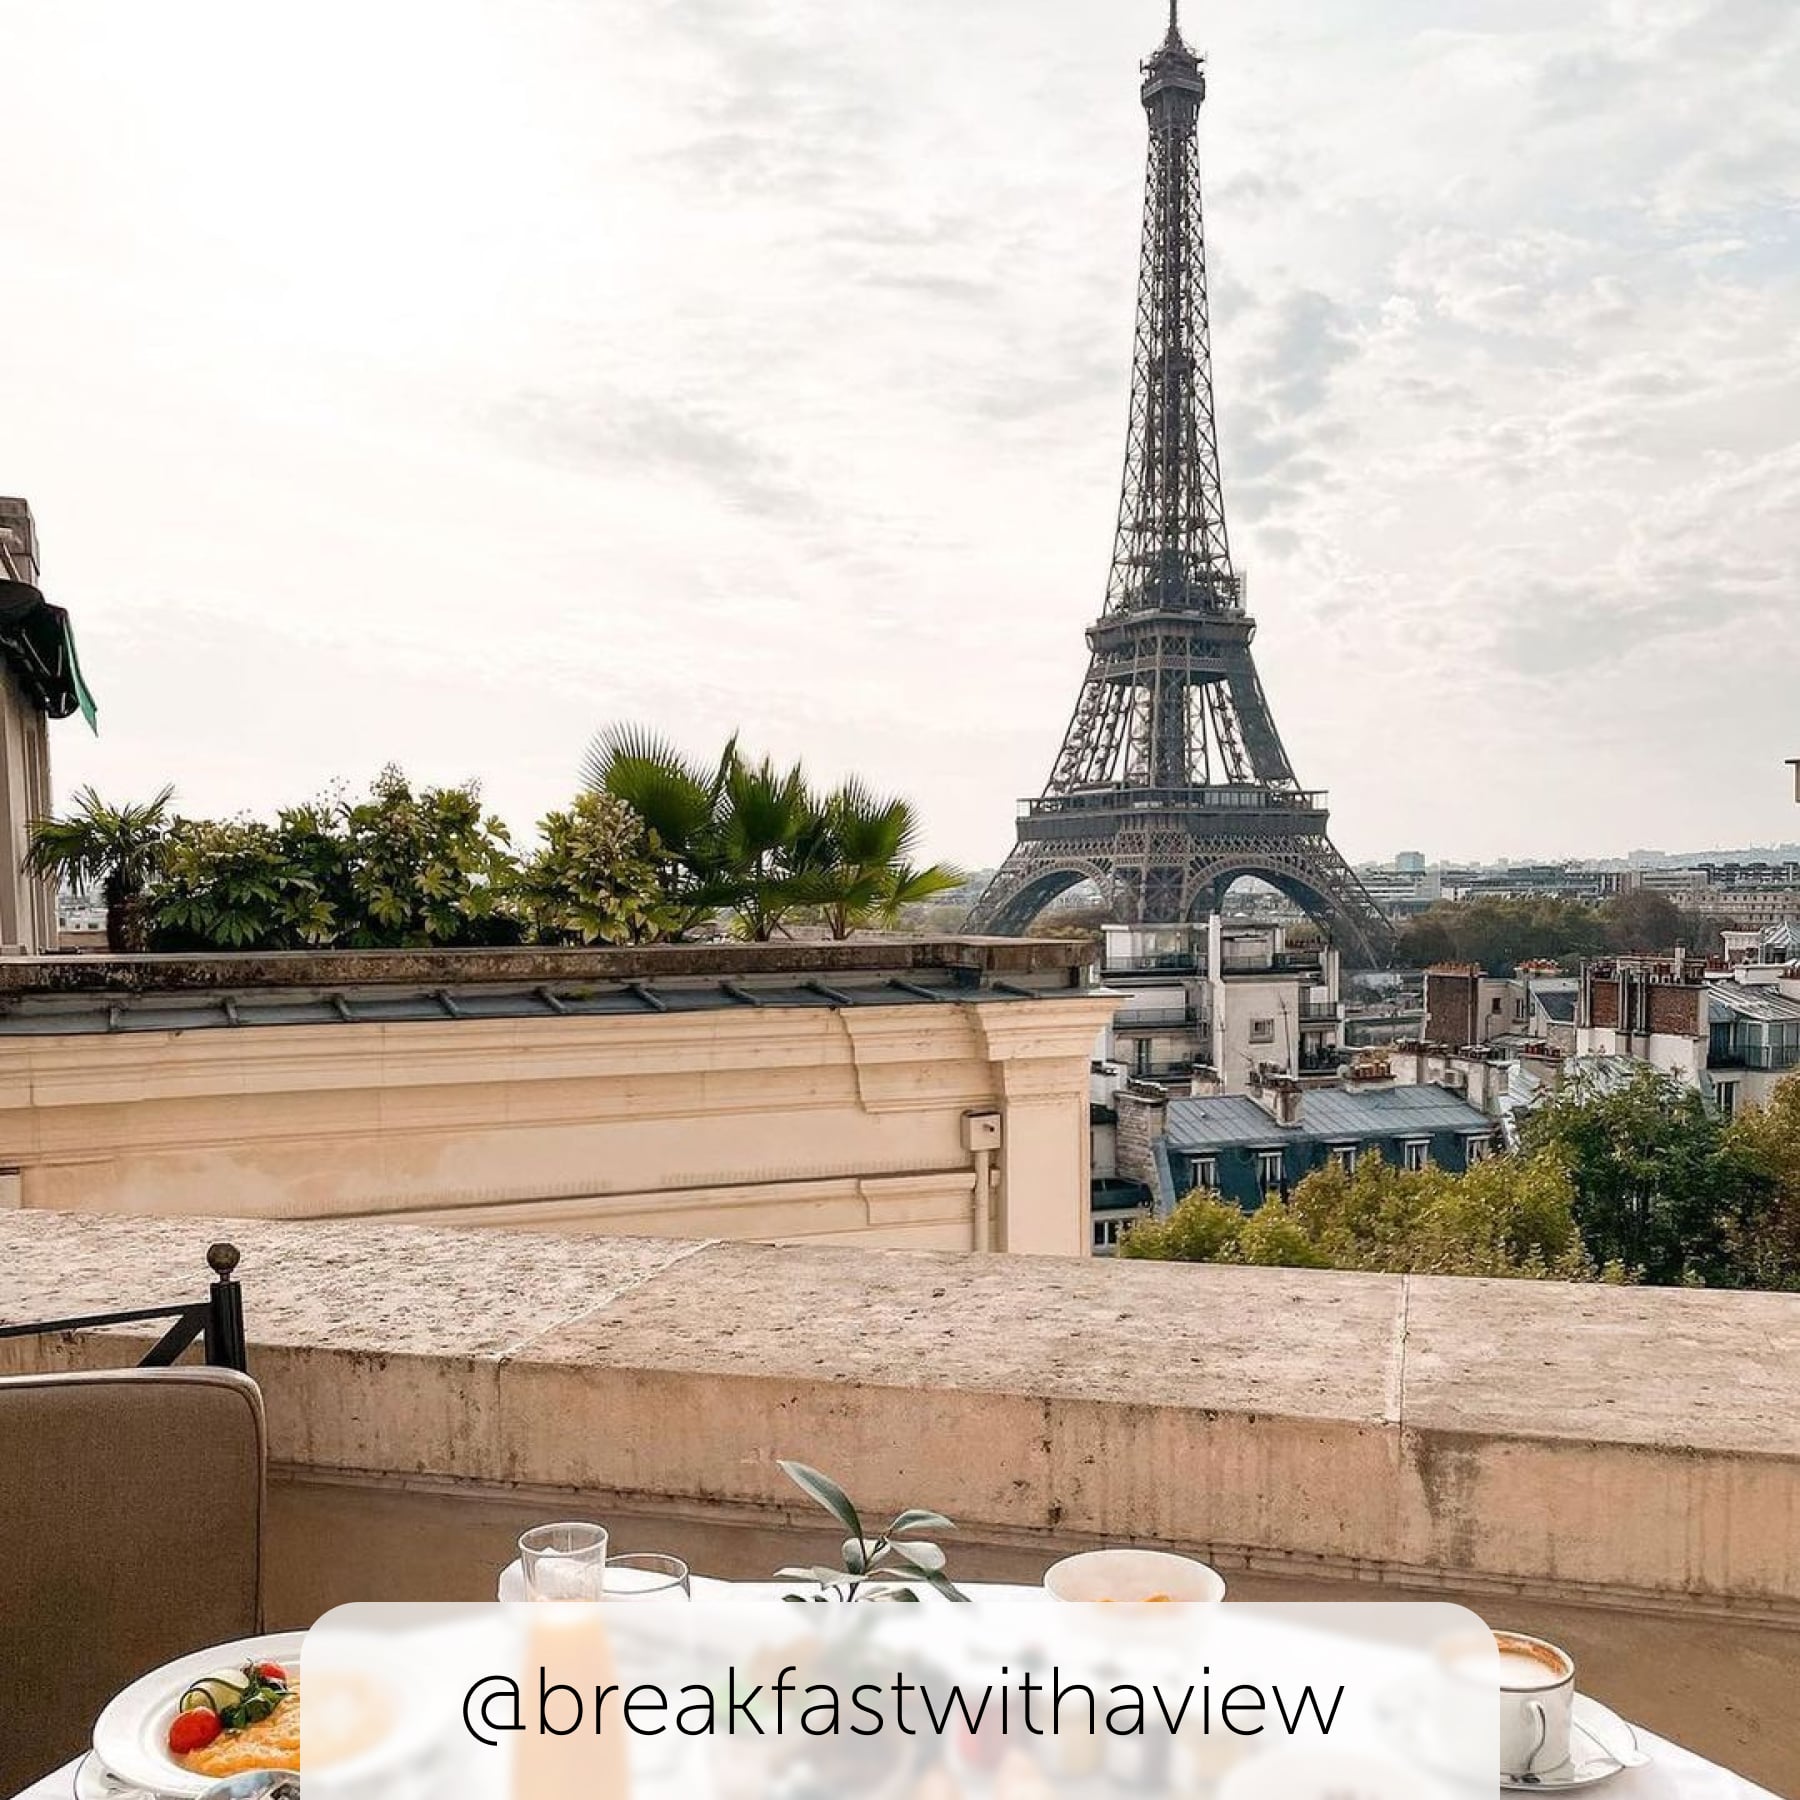 Paris is one of the best foodie destinations